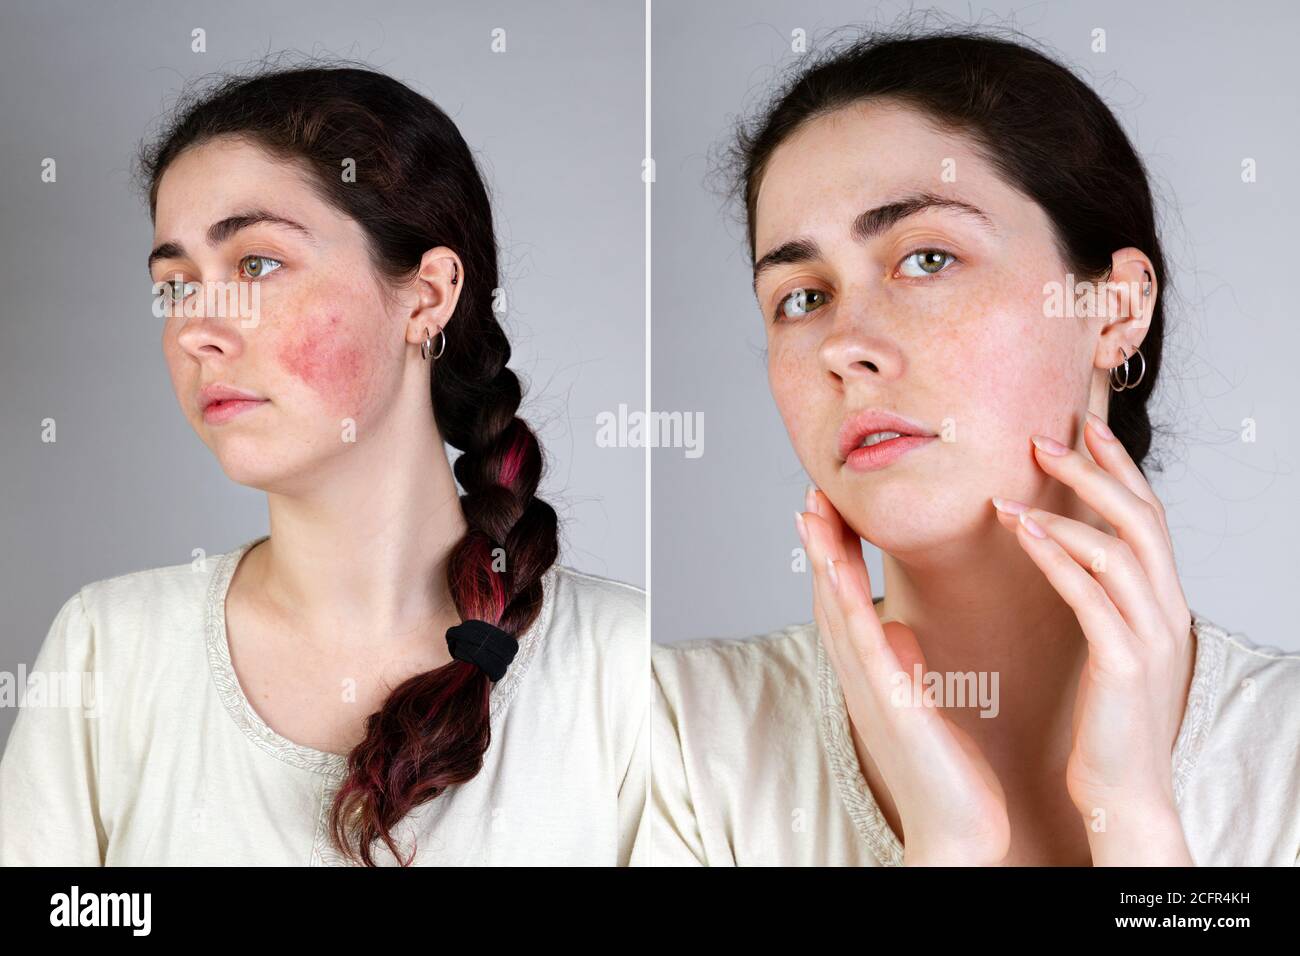 Portrait of a young Caucasian woman showing redness and inflamed blood vessels on her cheeks. Gray background. The concept of rosacea and couperose. B Stock Photo